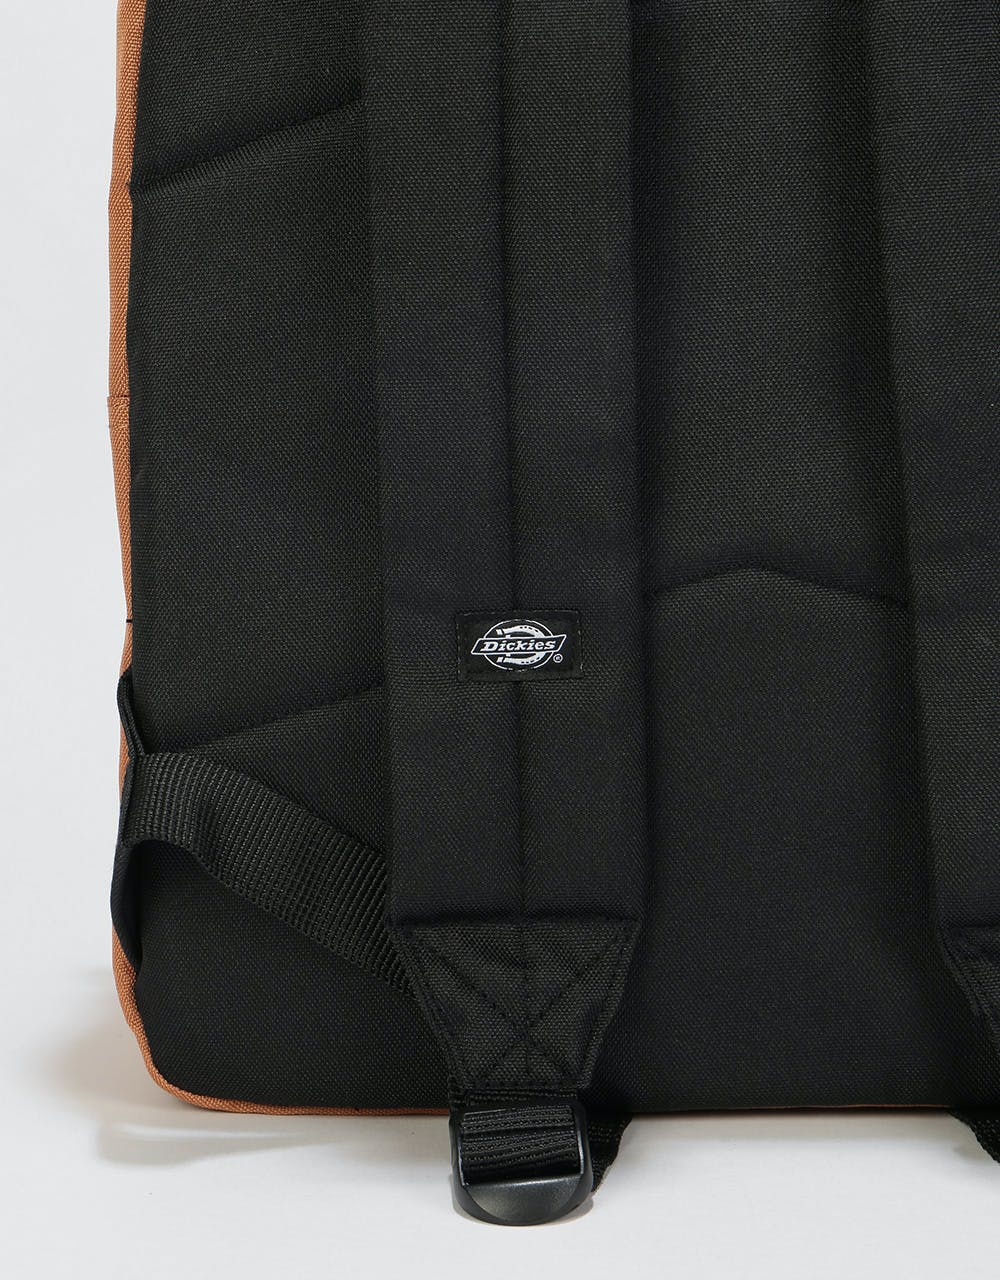 Dickies Arkville Backpack - Scout